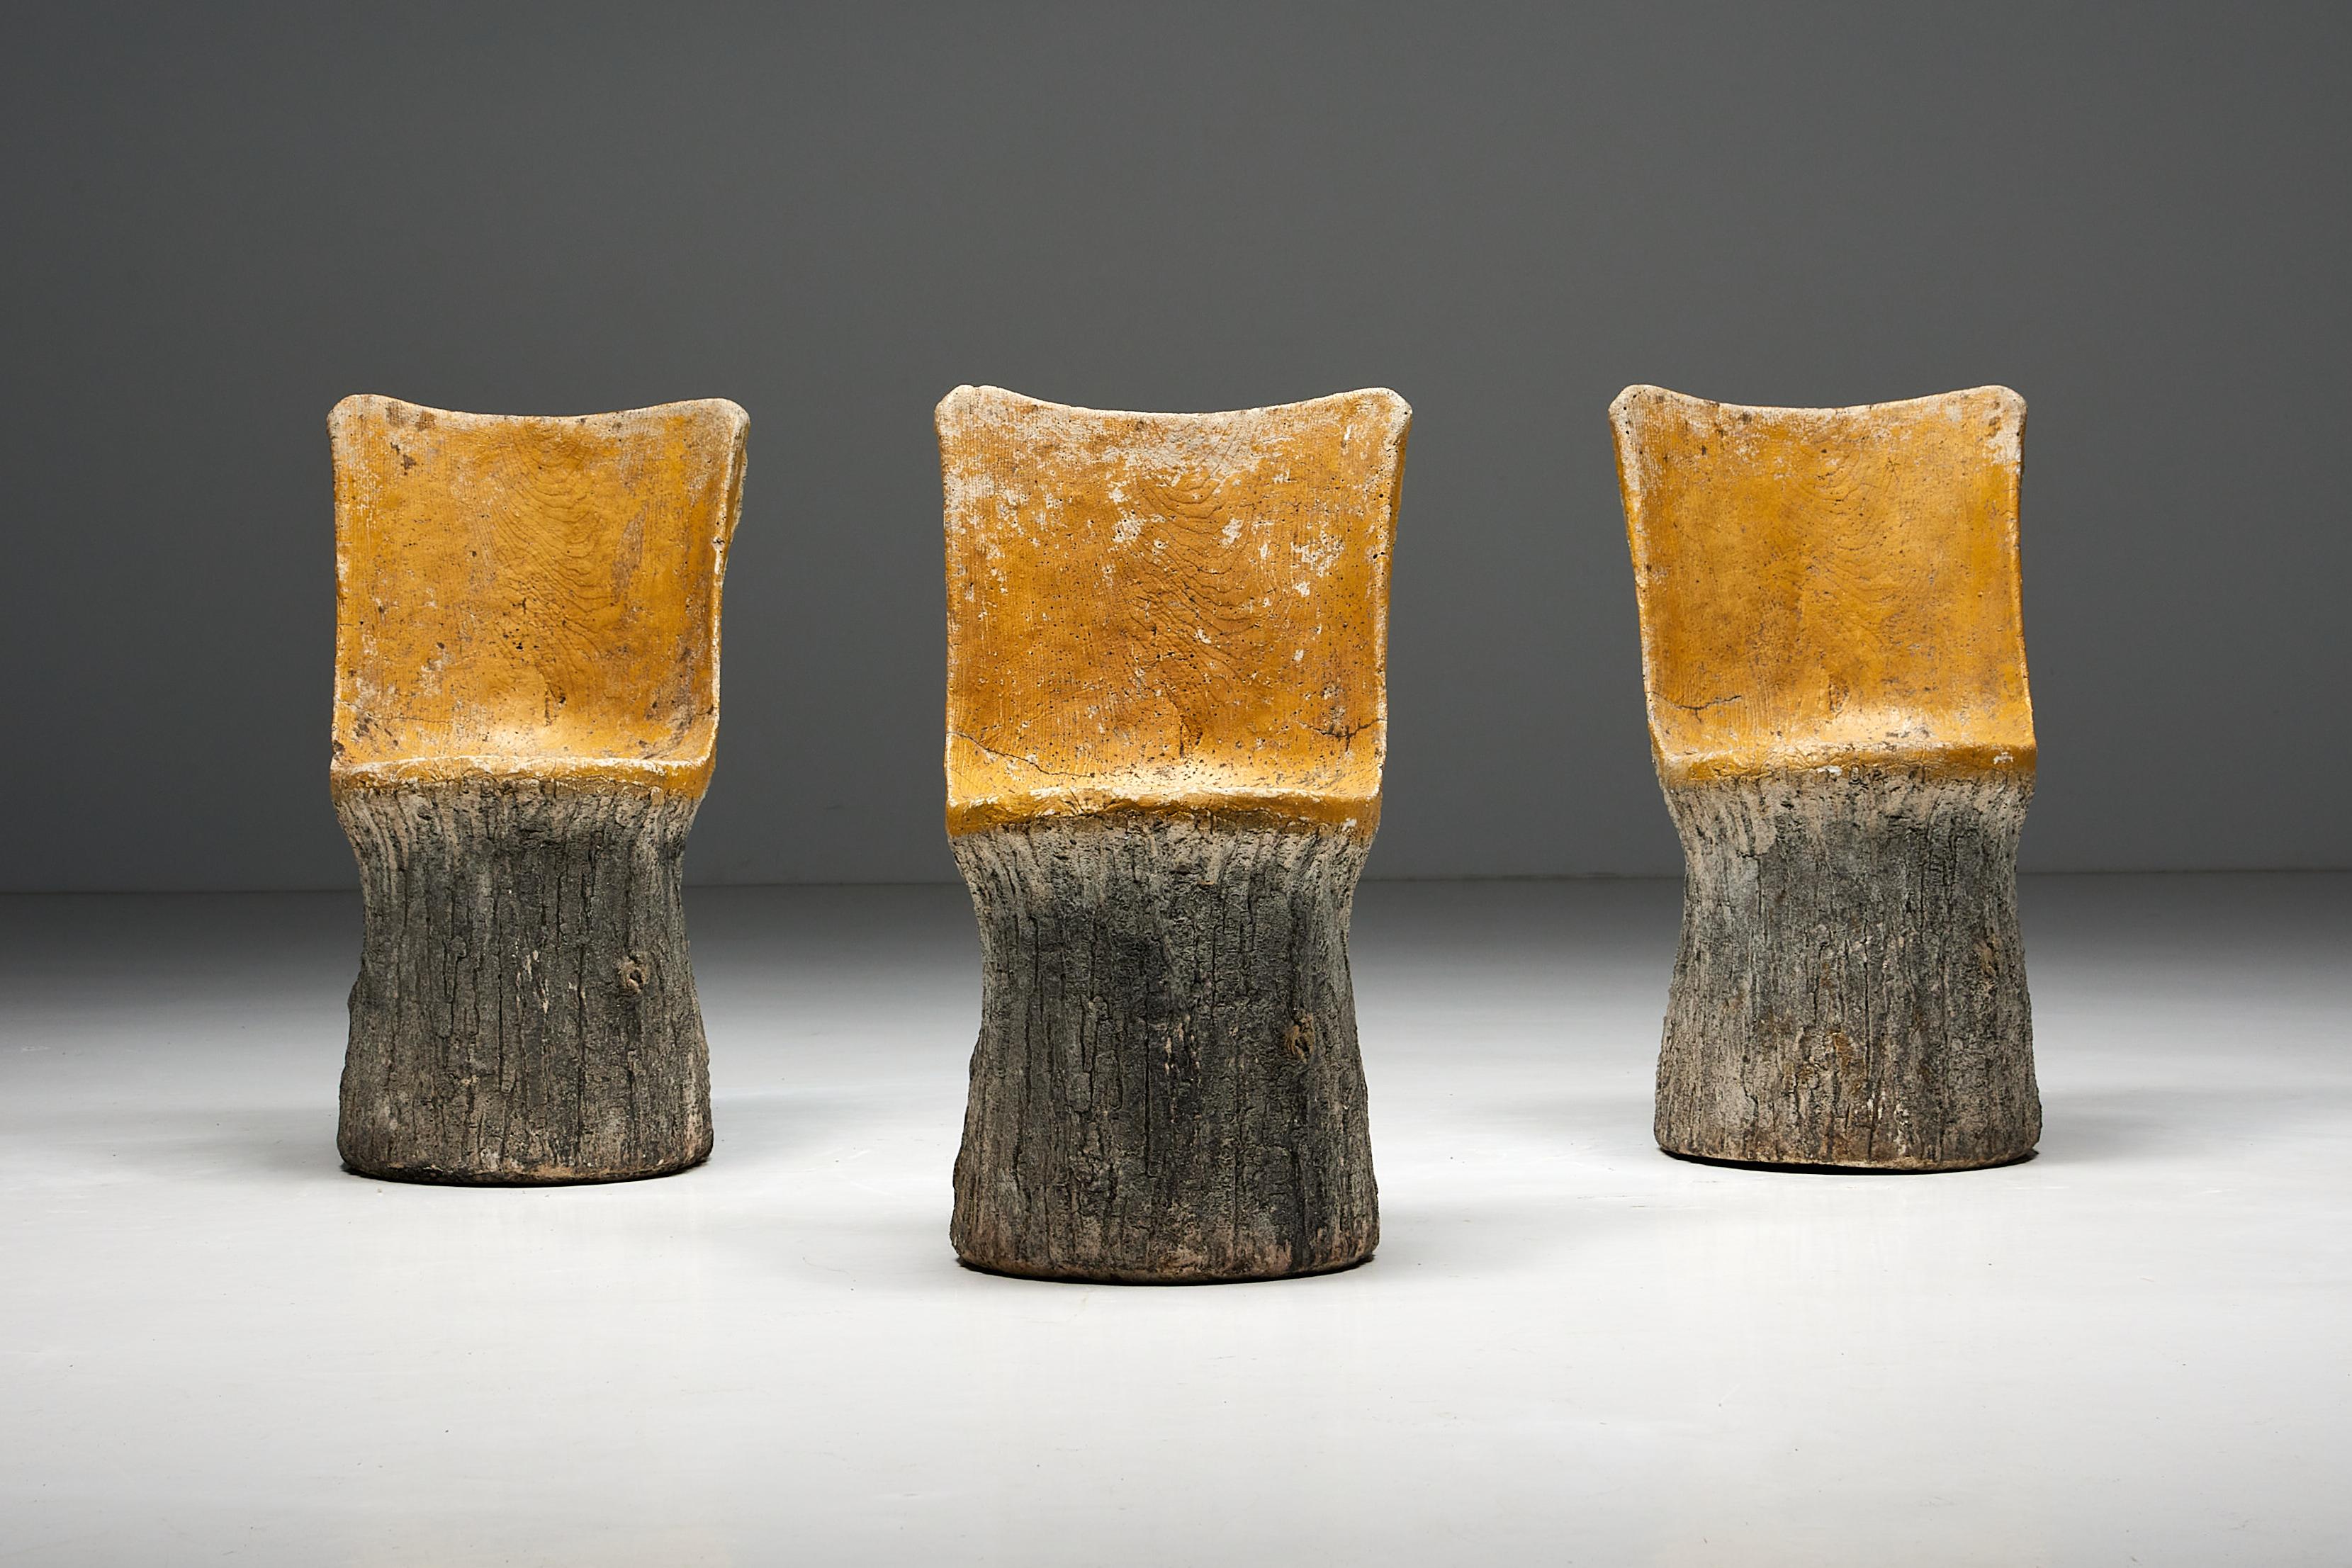 Concrete chairs from 1970s France, designed with a remarkable twist. These chairs offer a unique faux wood design that closely resembles the natural beauty of tree trunks. With their intricate details and expert craftsmanship, these chairs are a